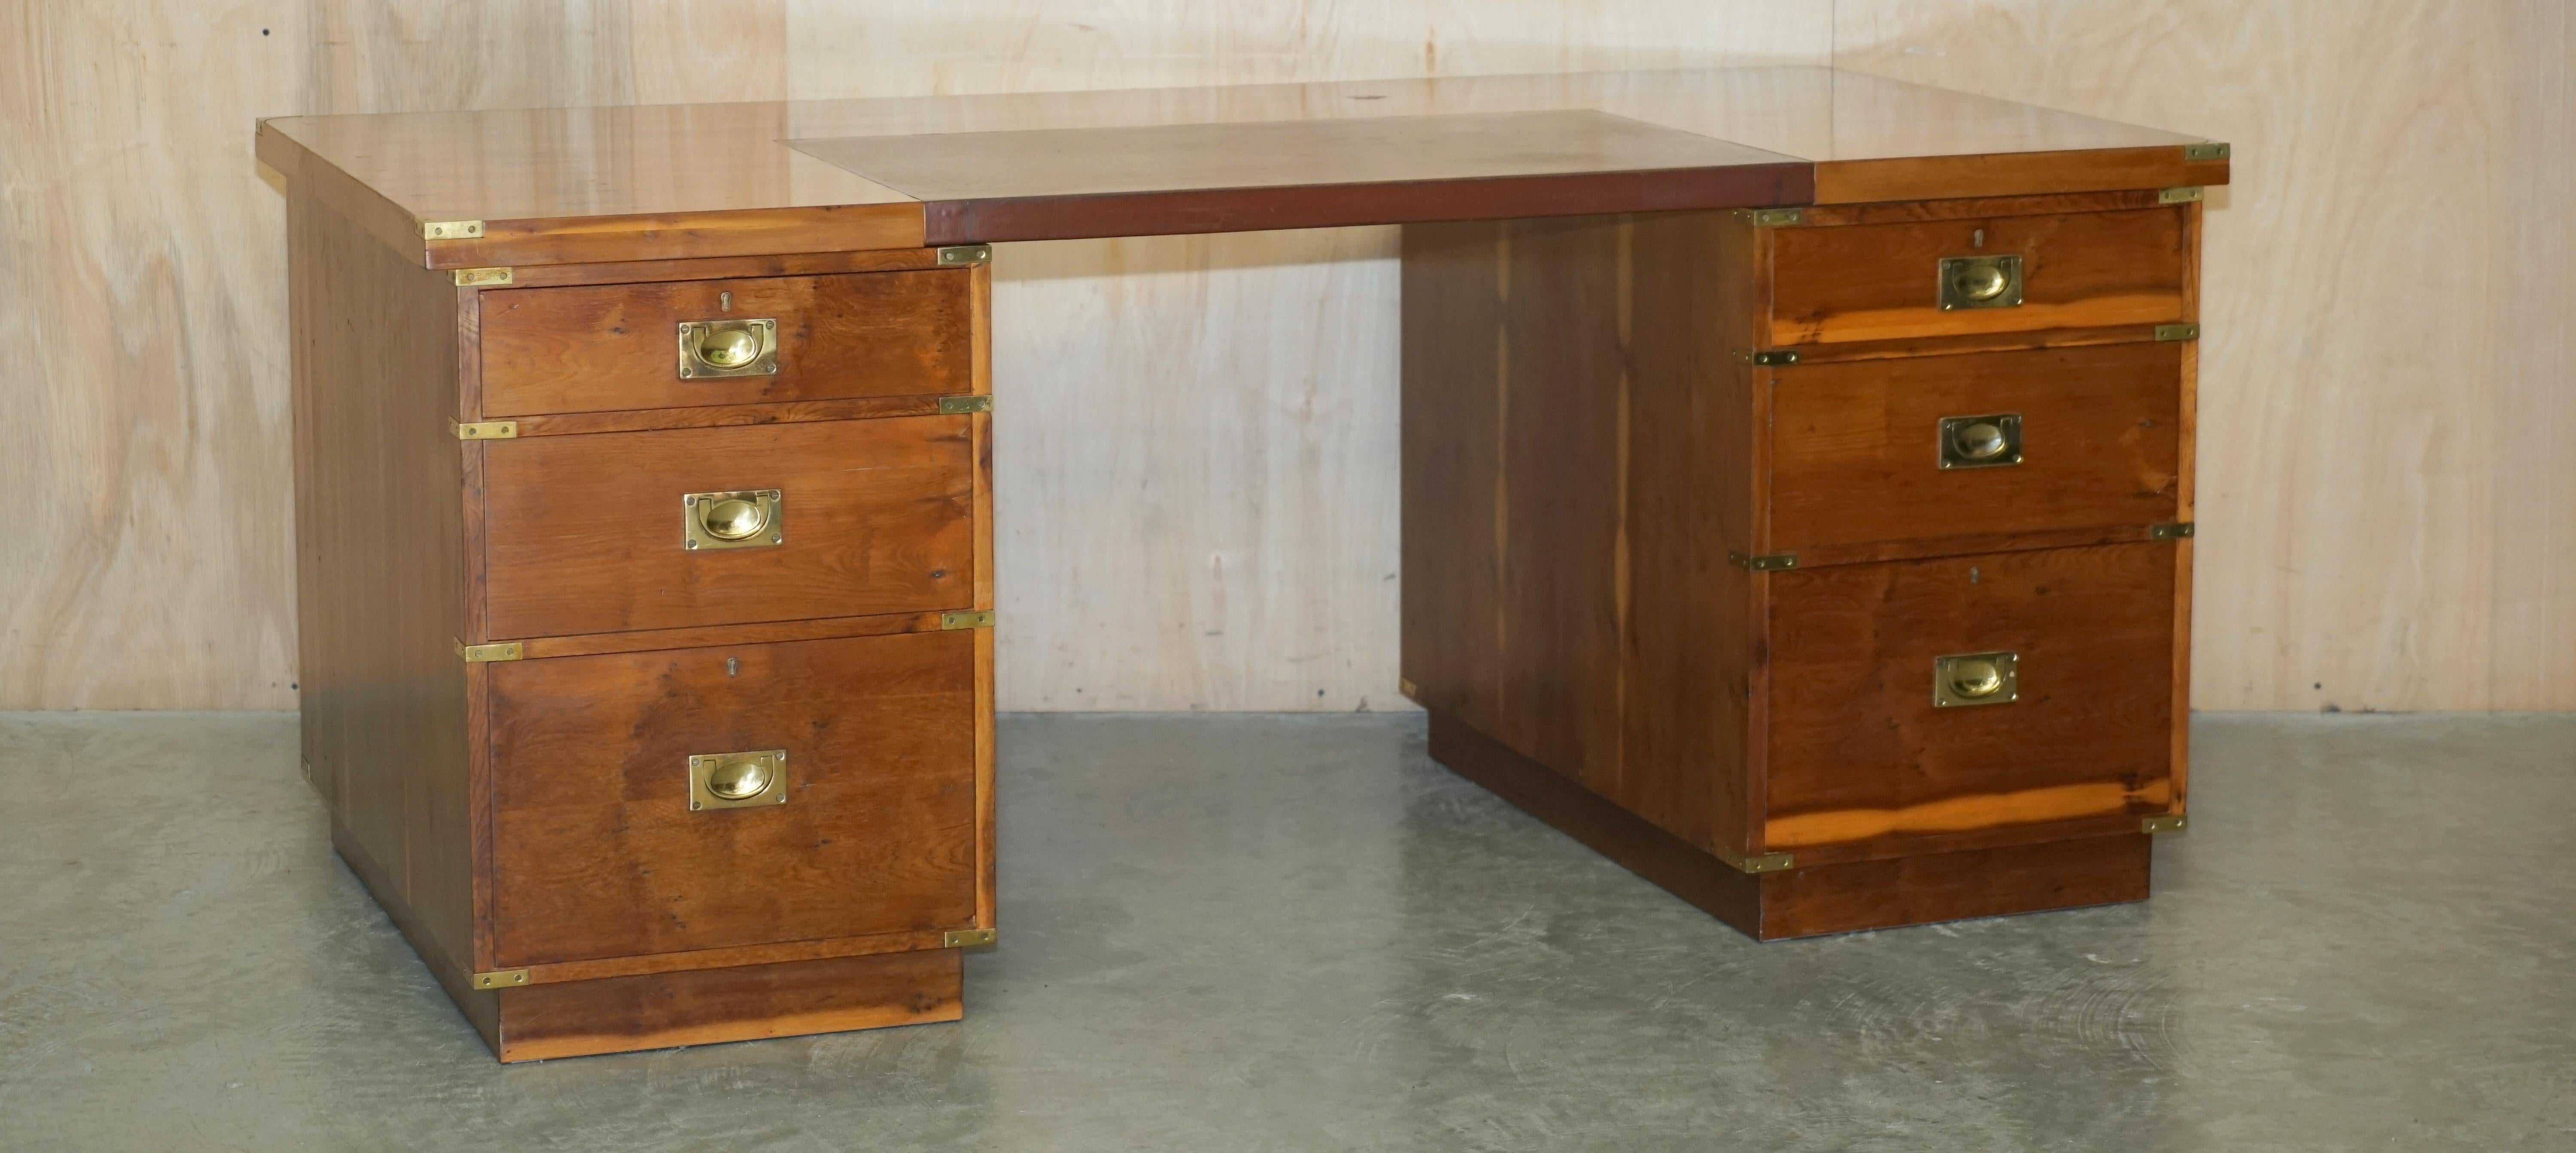 Royal House Antiques

Royal House Antiques is delighted to offer for sale this lovely burr yew wood, vintage twin pedestal partner desk with bookcase / cupboard back 

Please note the delivery fee listed is just a guide, it covers within the M25